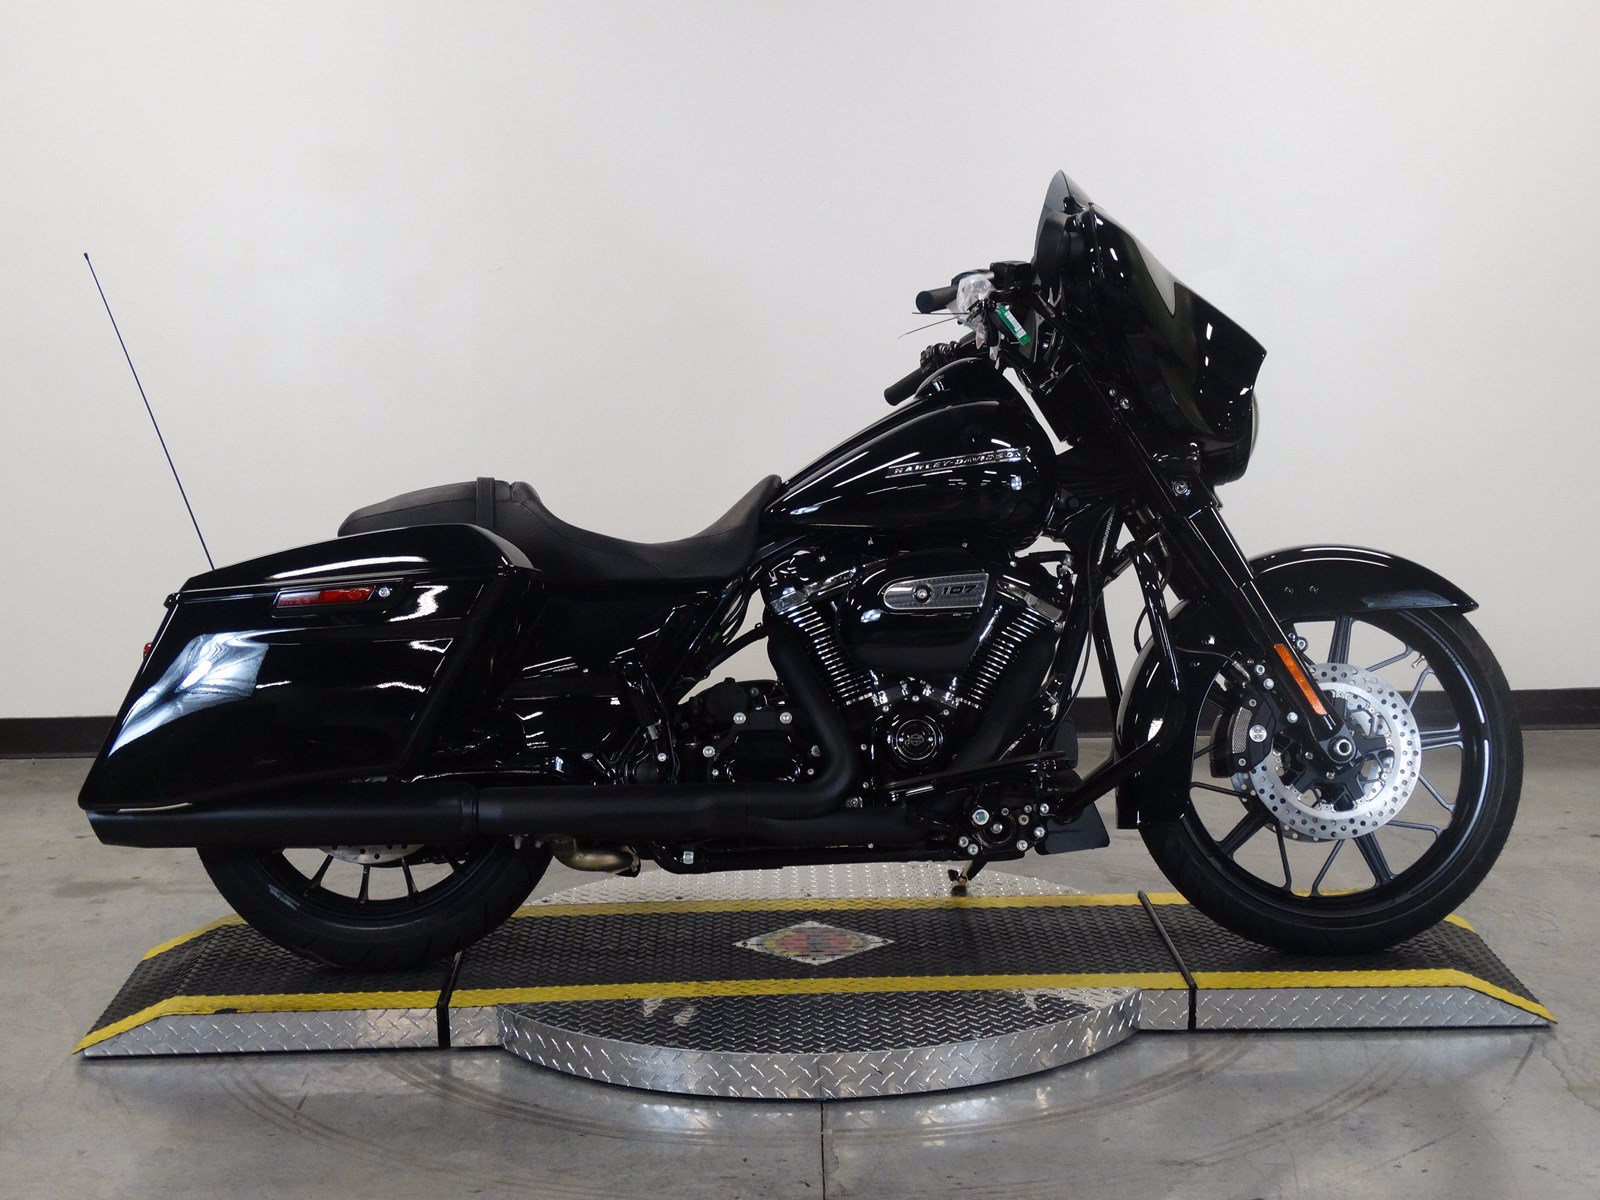 New 2018 Harley Davidson Street Glide Special FLHXS Touring in Olathe #H637987 | Rawhide Harley ...